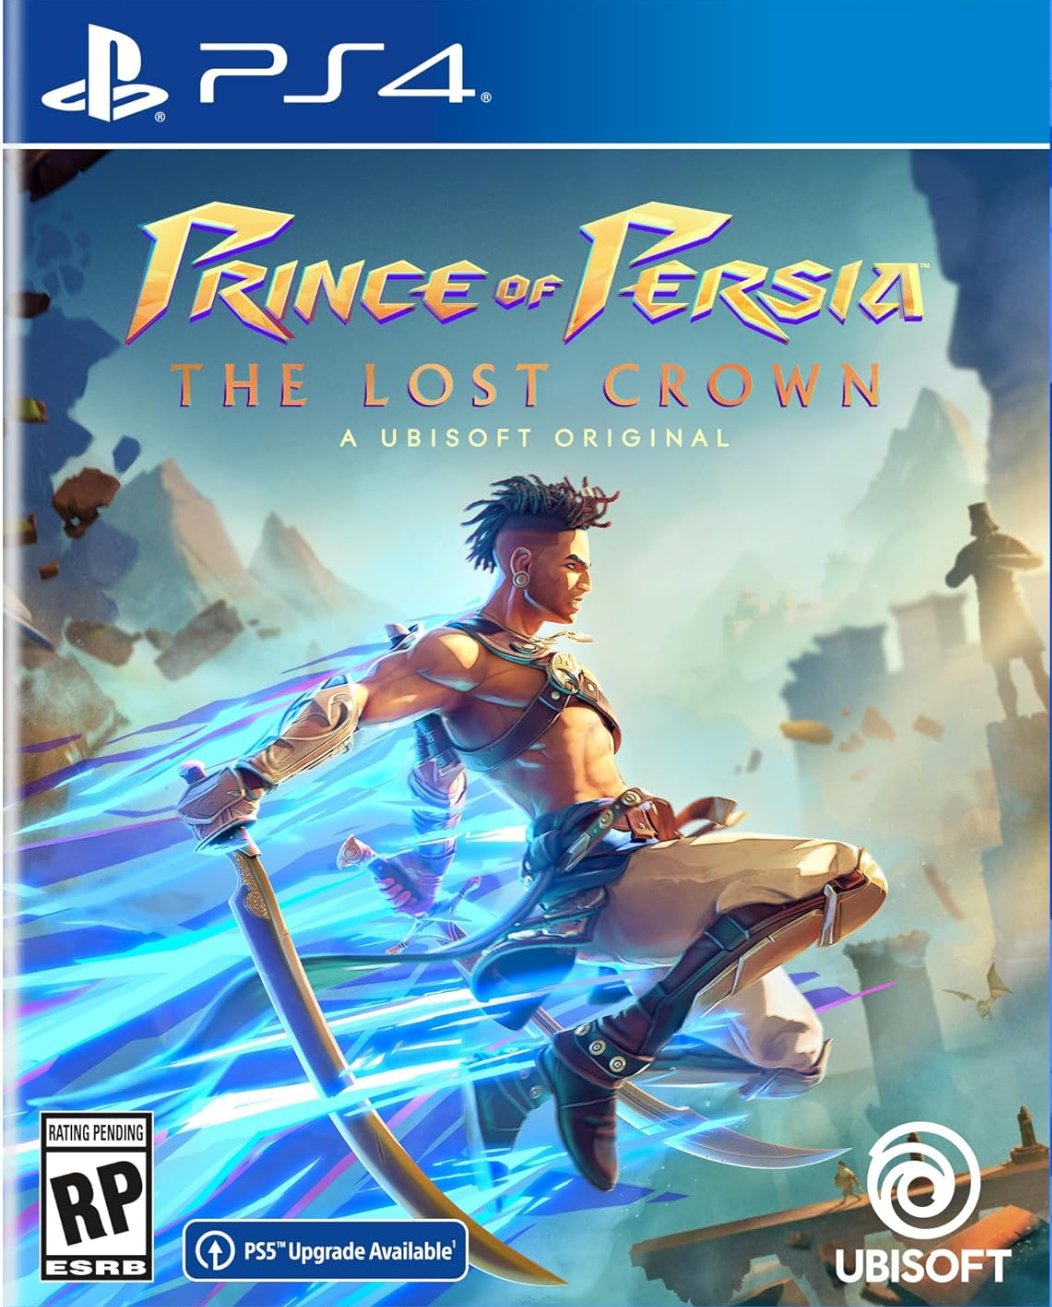 PRINCE OF LOST CROWN PS4 - EASY GAMES